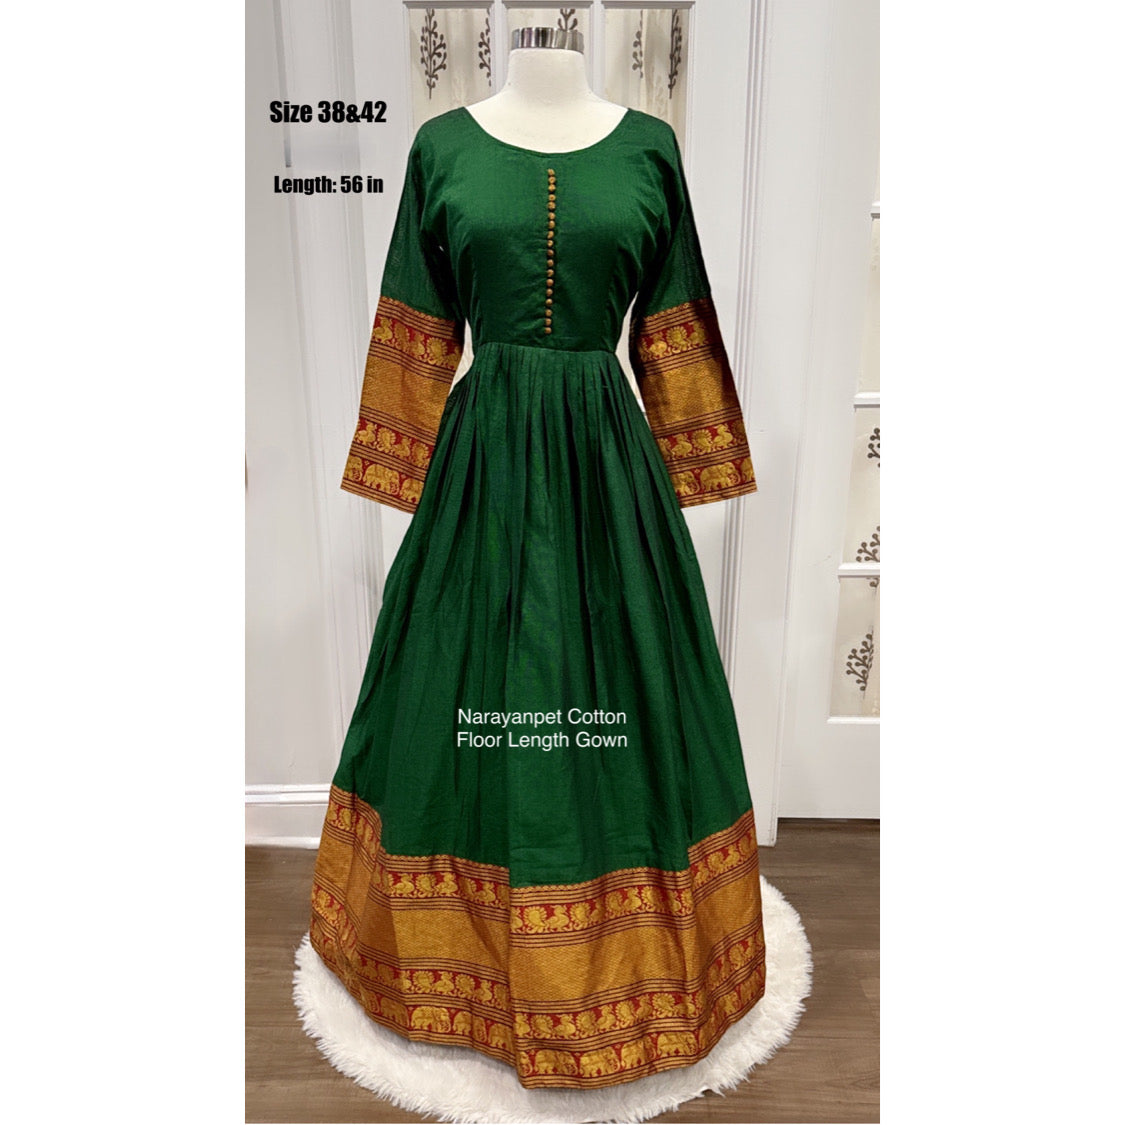 😍Beautiful Green color Narayanpet traditional gown in. Fits size 38, 40 and 42😍